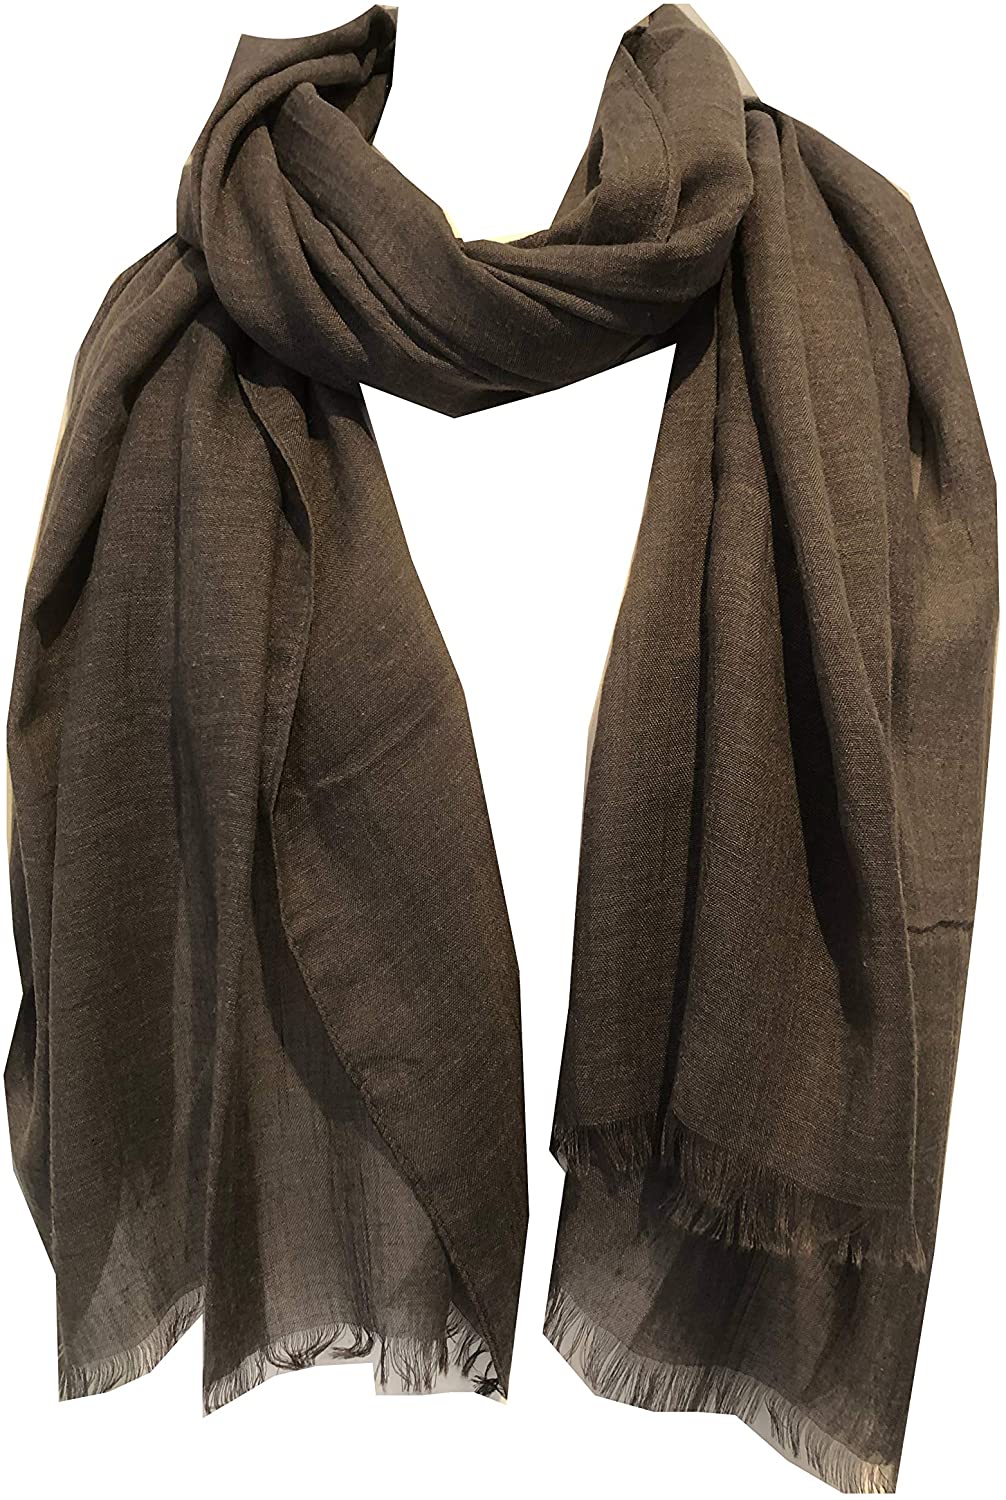 Pamper Yourself Now Dark Grey Plain Soft Long Scarf/wrap with Frayed Edge